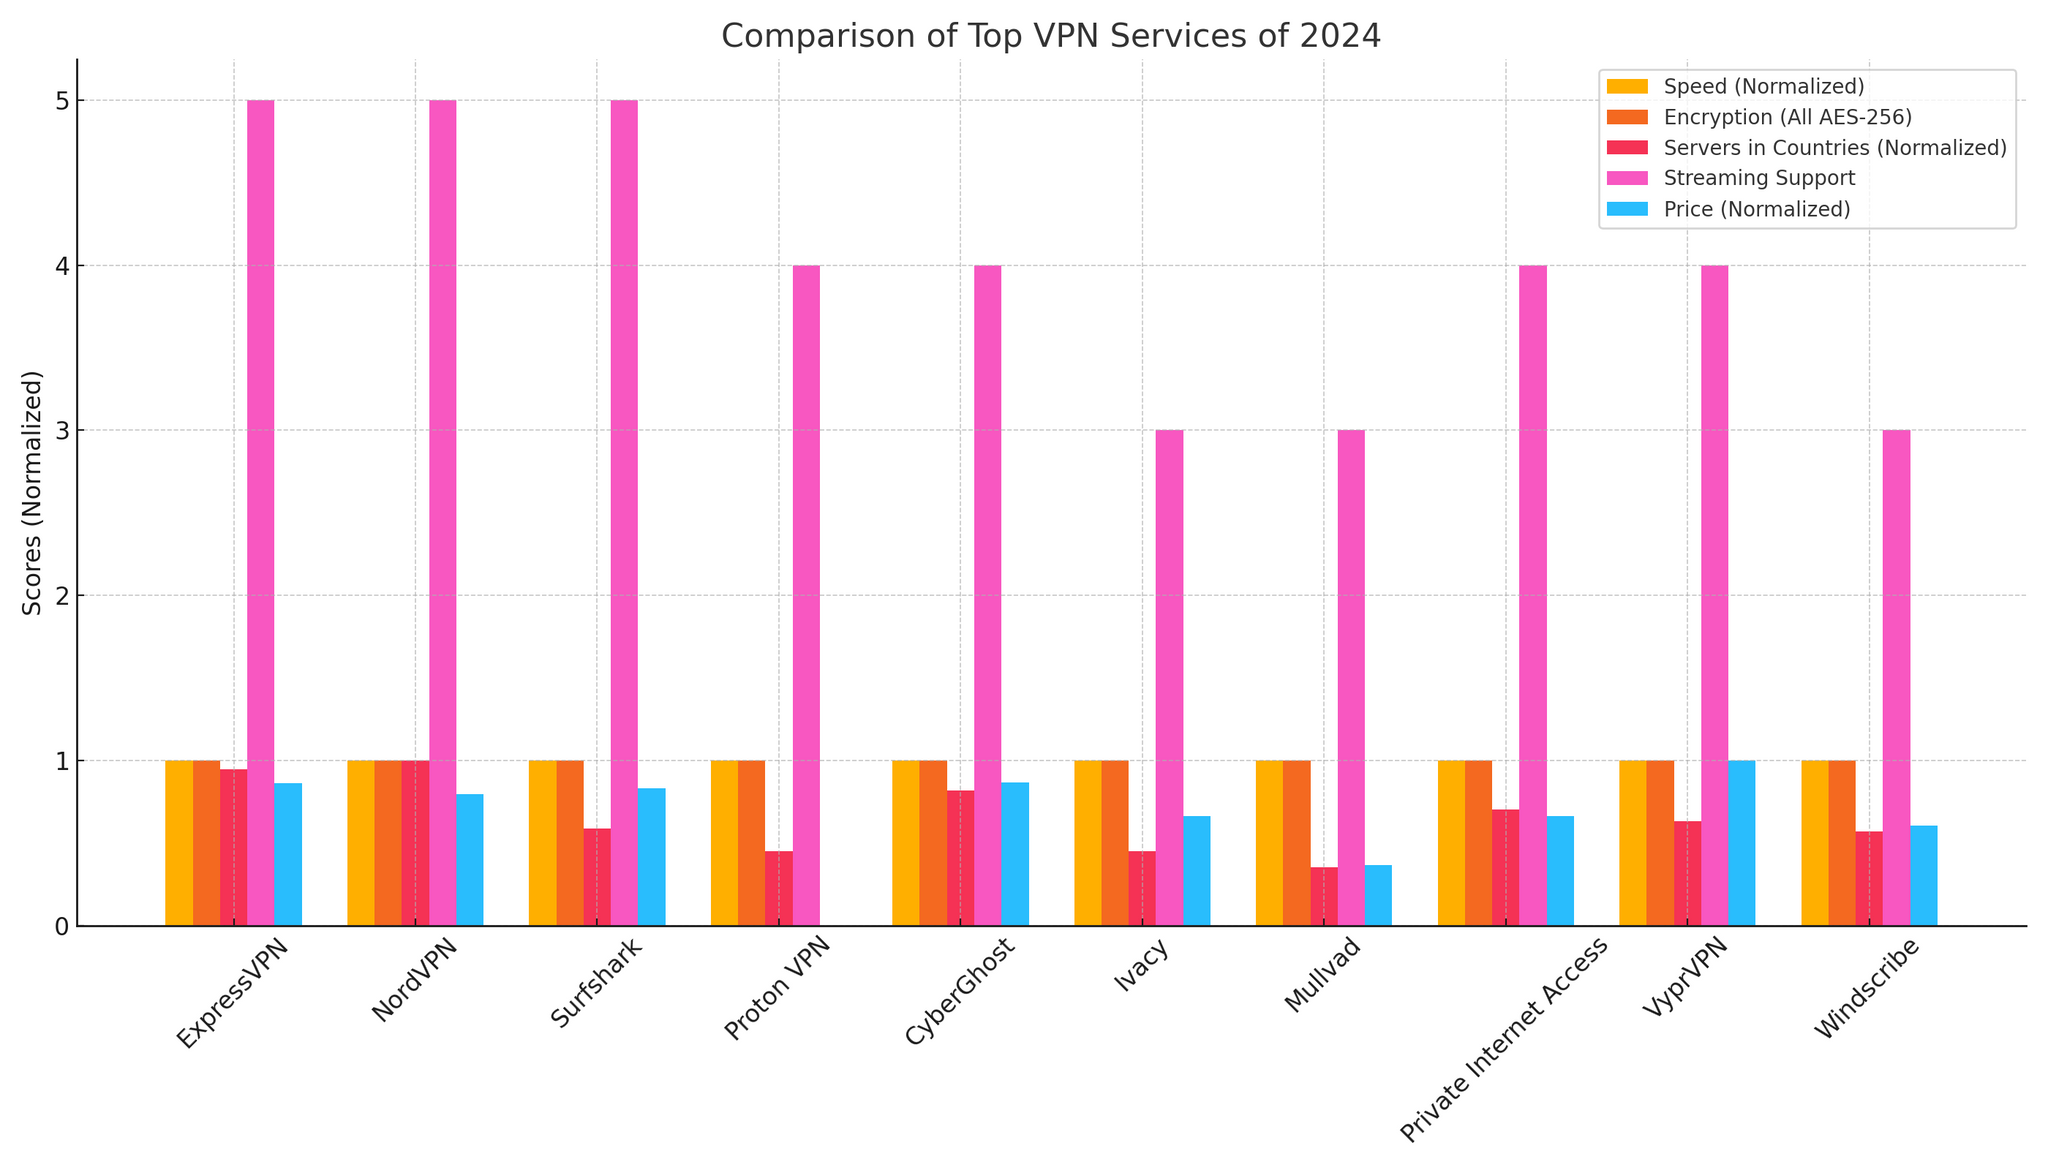 Top VPN Services of 2024